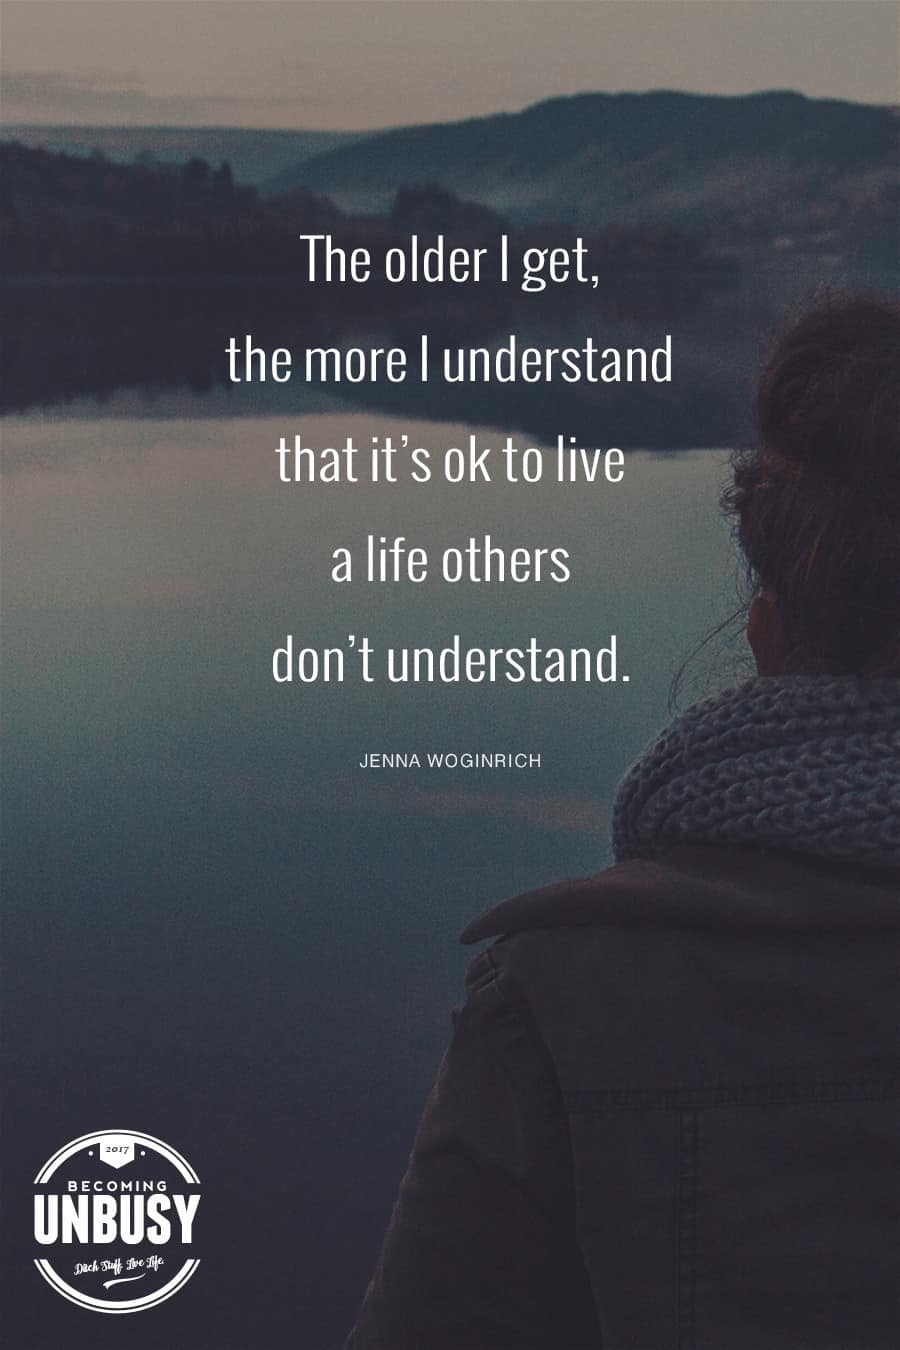 The older I get the more I understand it's ok to live a life other's don't understand. #quote #BecomingUnBusy *Love this video and site